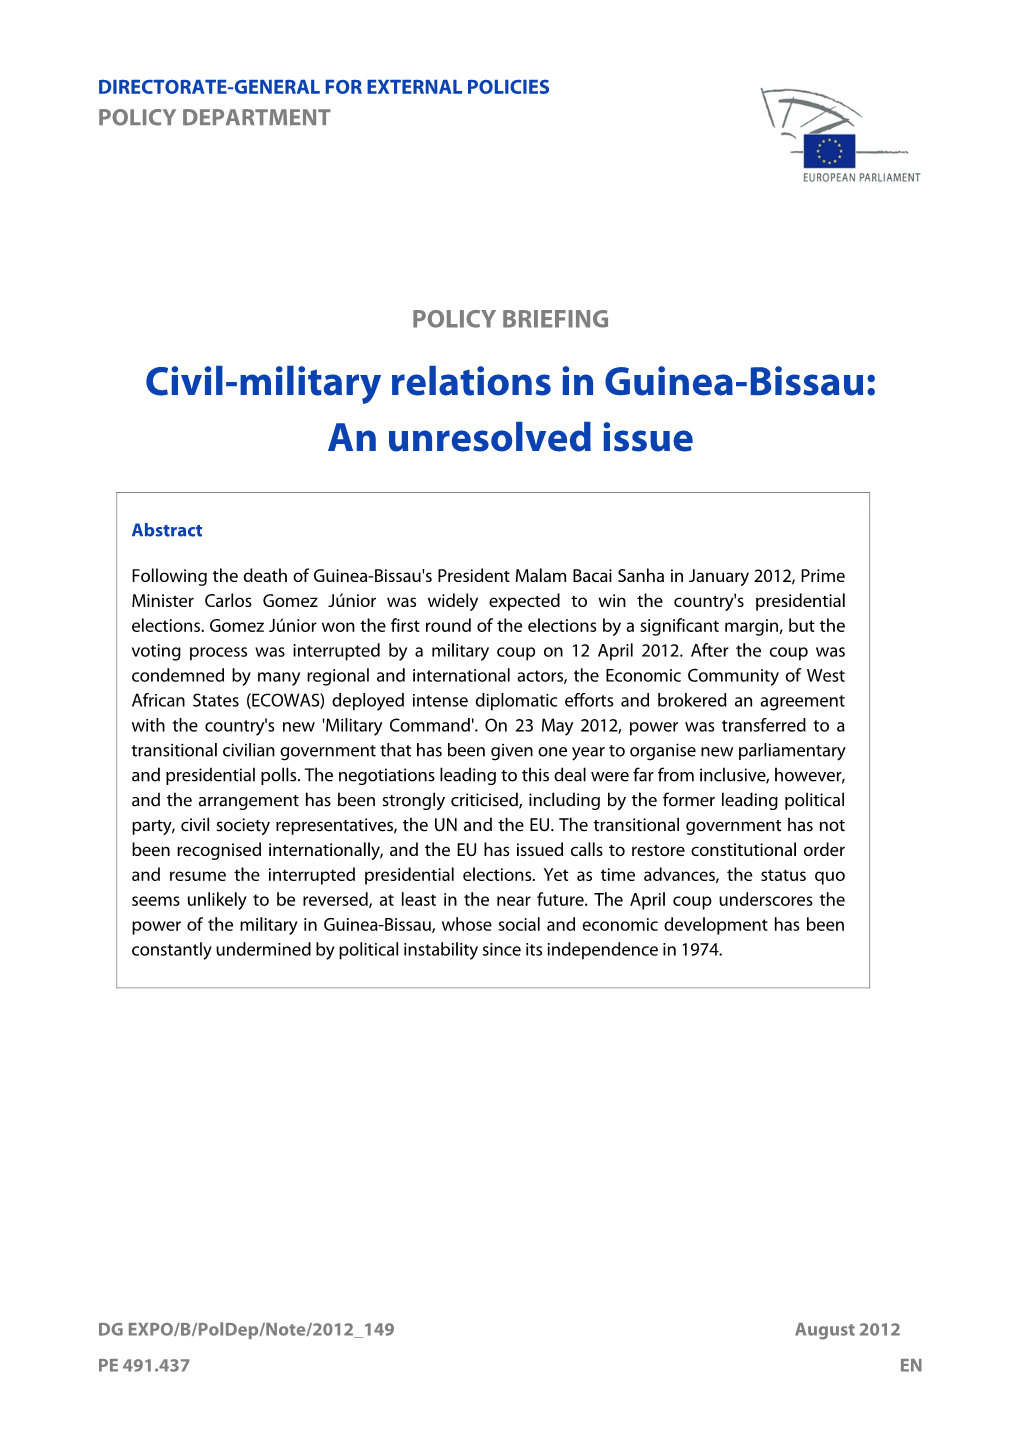 Civil-Military Relations in Guinea-Bissau: an Unresolved Issue